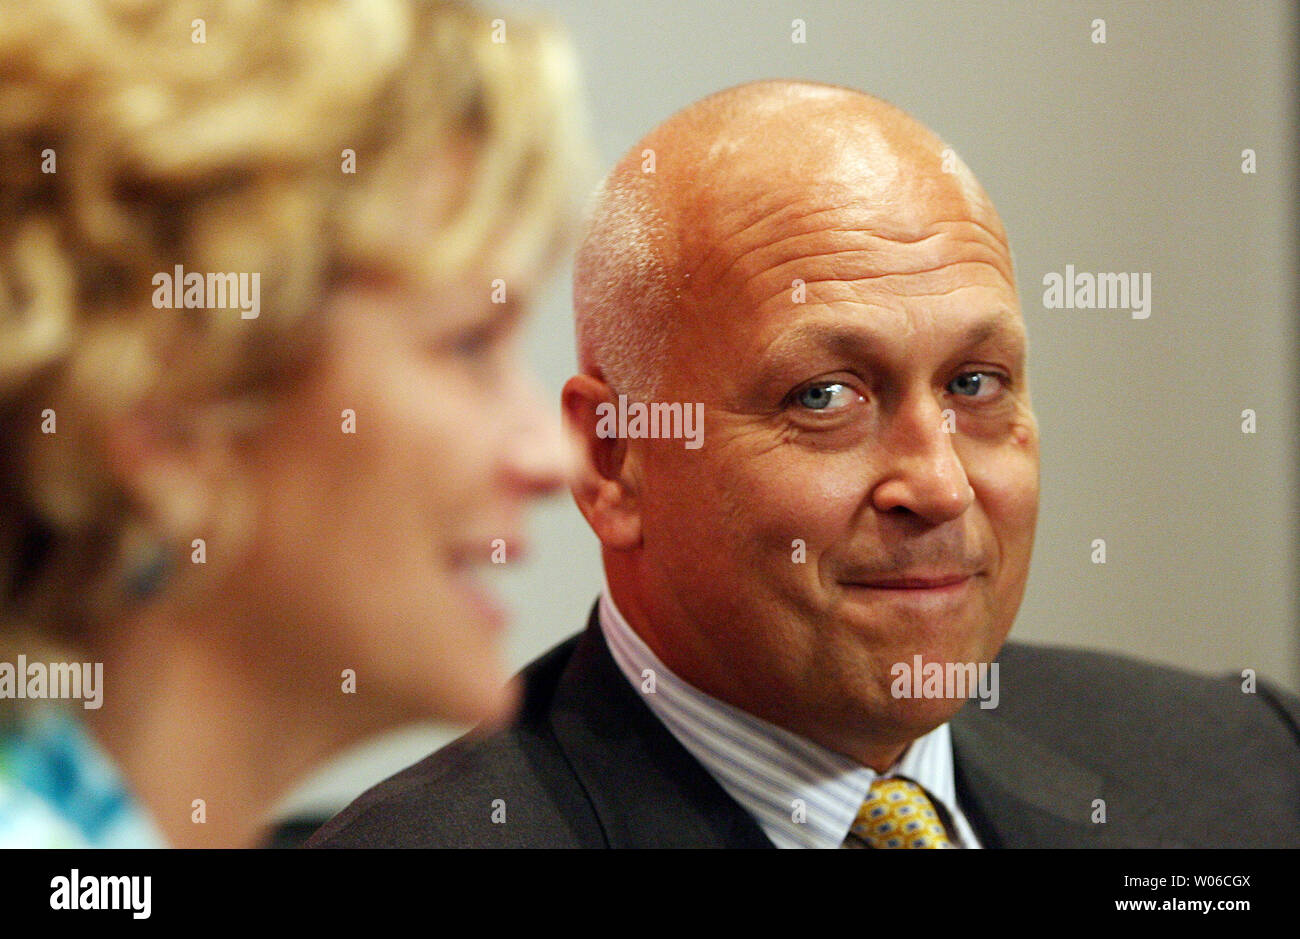 Baseball Hall of Fame member Cal Ripken, Jr. listens as Melanie Goldish of Hoffman Estates, Illinois, tells her story before being honored with the Energizer 'Keep Going Award,' at Energizer headquarters in Chesterfield, Missouri on September 20, 2007. Goldish was given the award for founding and being the executive director of SuperSibs, an organization that supports brothers and sisters of children with cancer. The award was created in 2006 to bring attention to everyday people that help others with their dedication and hard work. Goldish created SuperSibs after one of her two sons developed Stock Photo